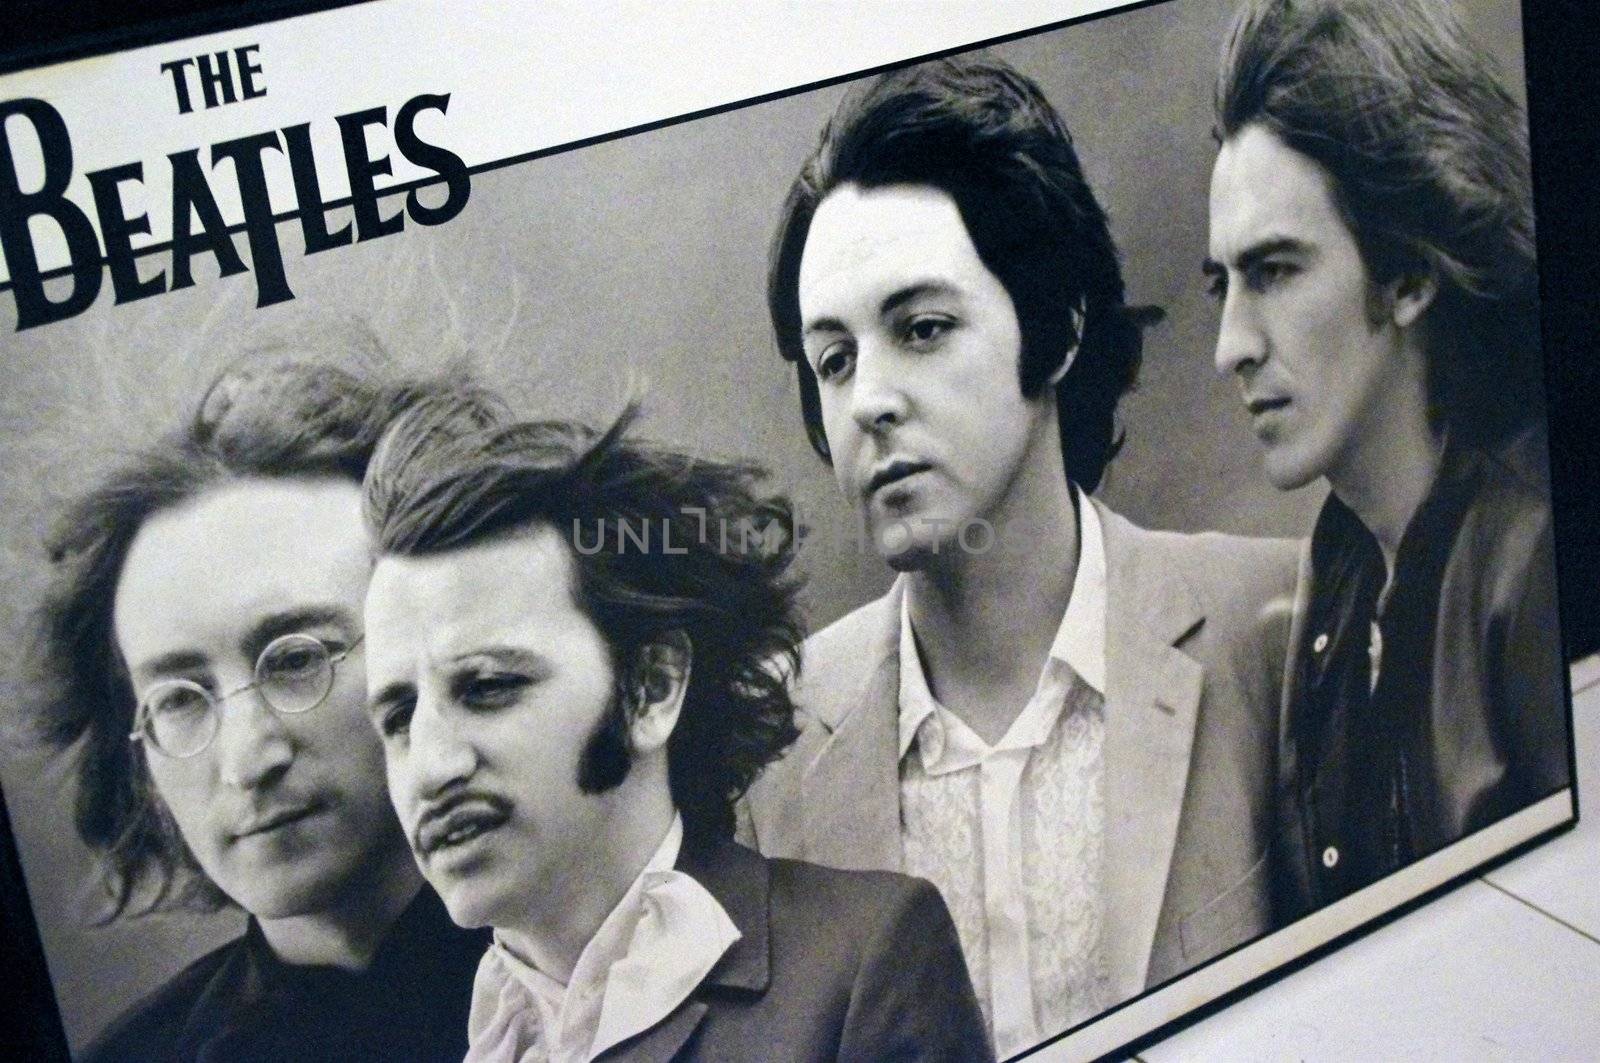 A mounted poster of the English rock band, The Beatles. No other group in history has generated more public thirst for merchandise than The Beatles.